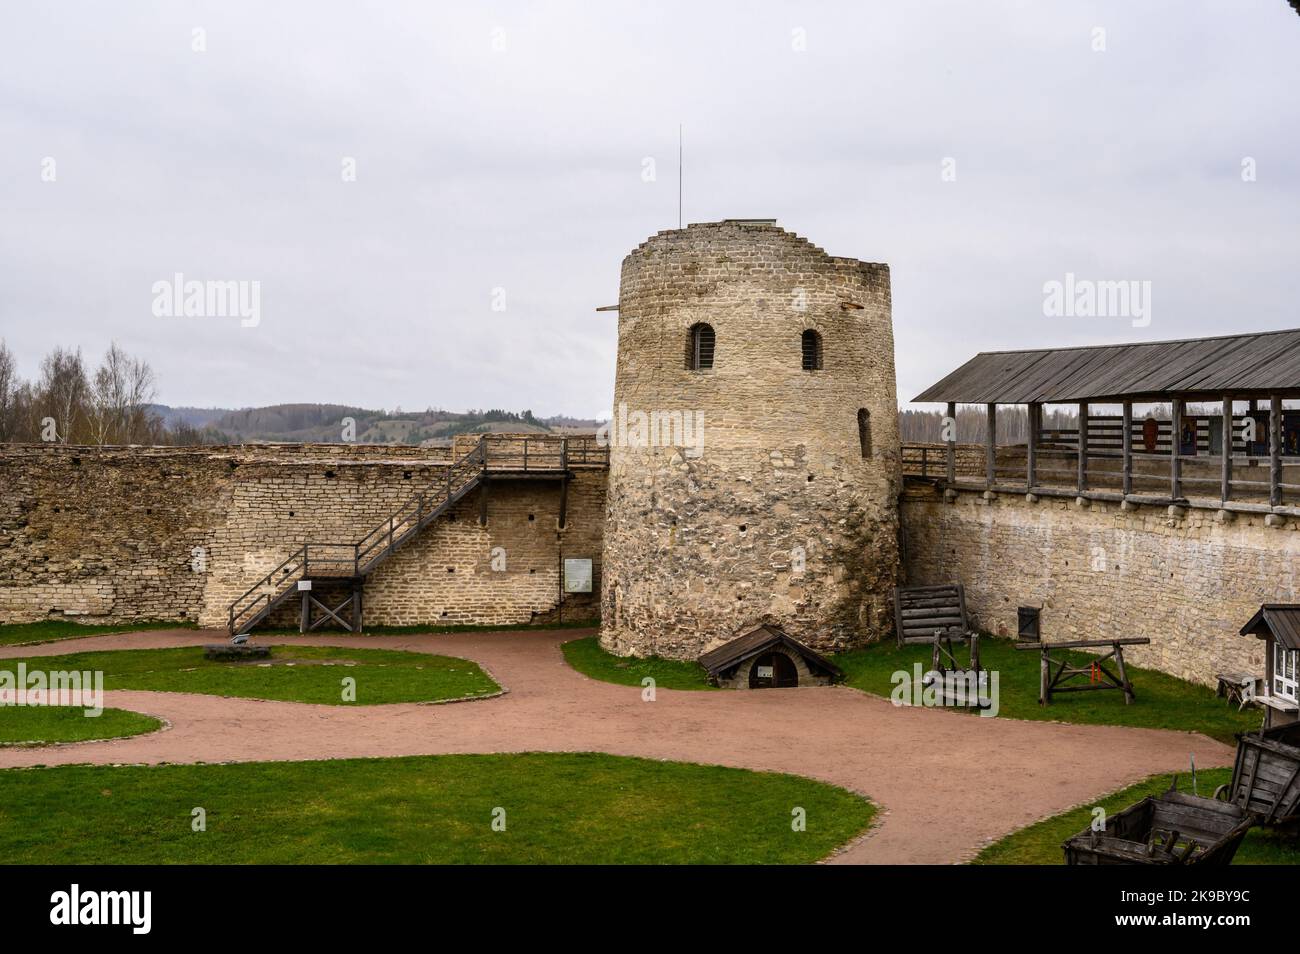 Lukovka Tower Izborsk Fortress. Izborsk Pskov Oblast. Historical places of Russia. The old ruined fortress. Stock Photo